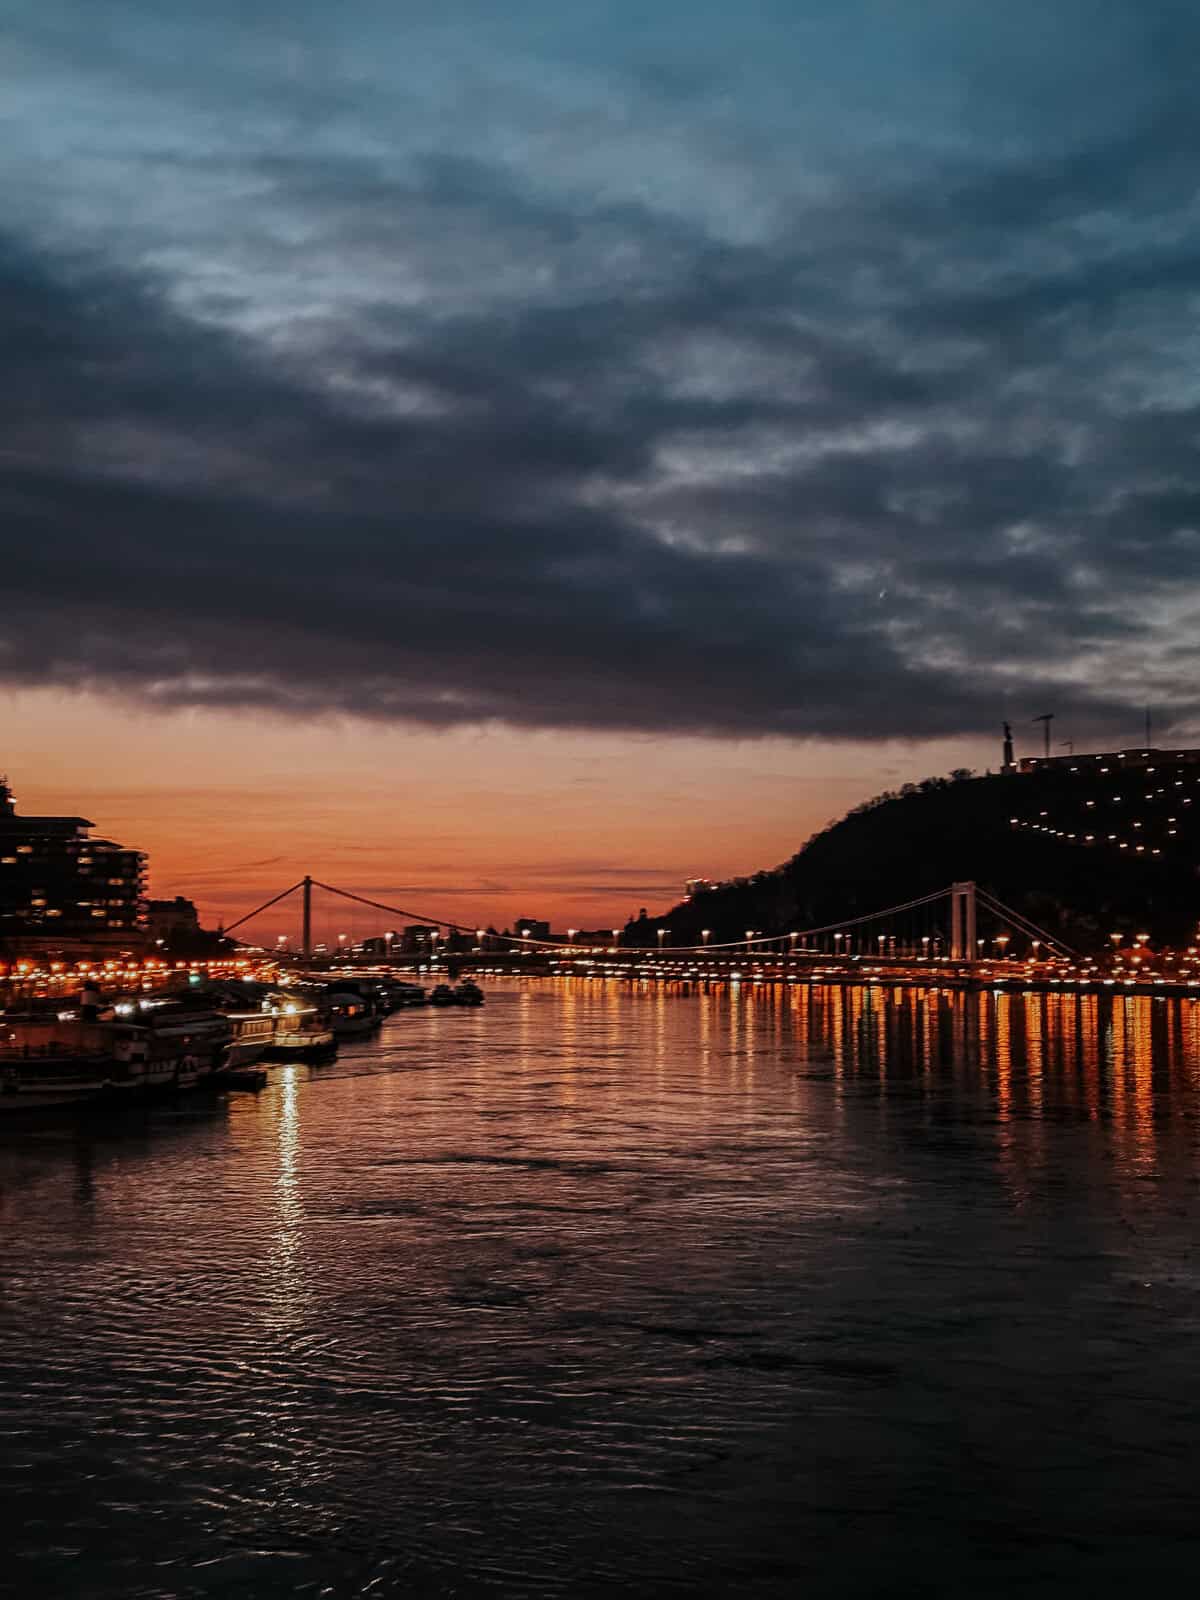 The Danube River at sunset with dark clouds overhead, city lights reflecting on the water, and a bridge in the distance.